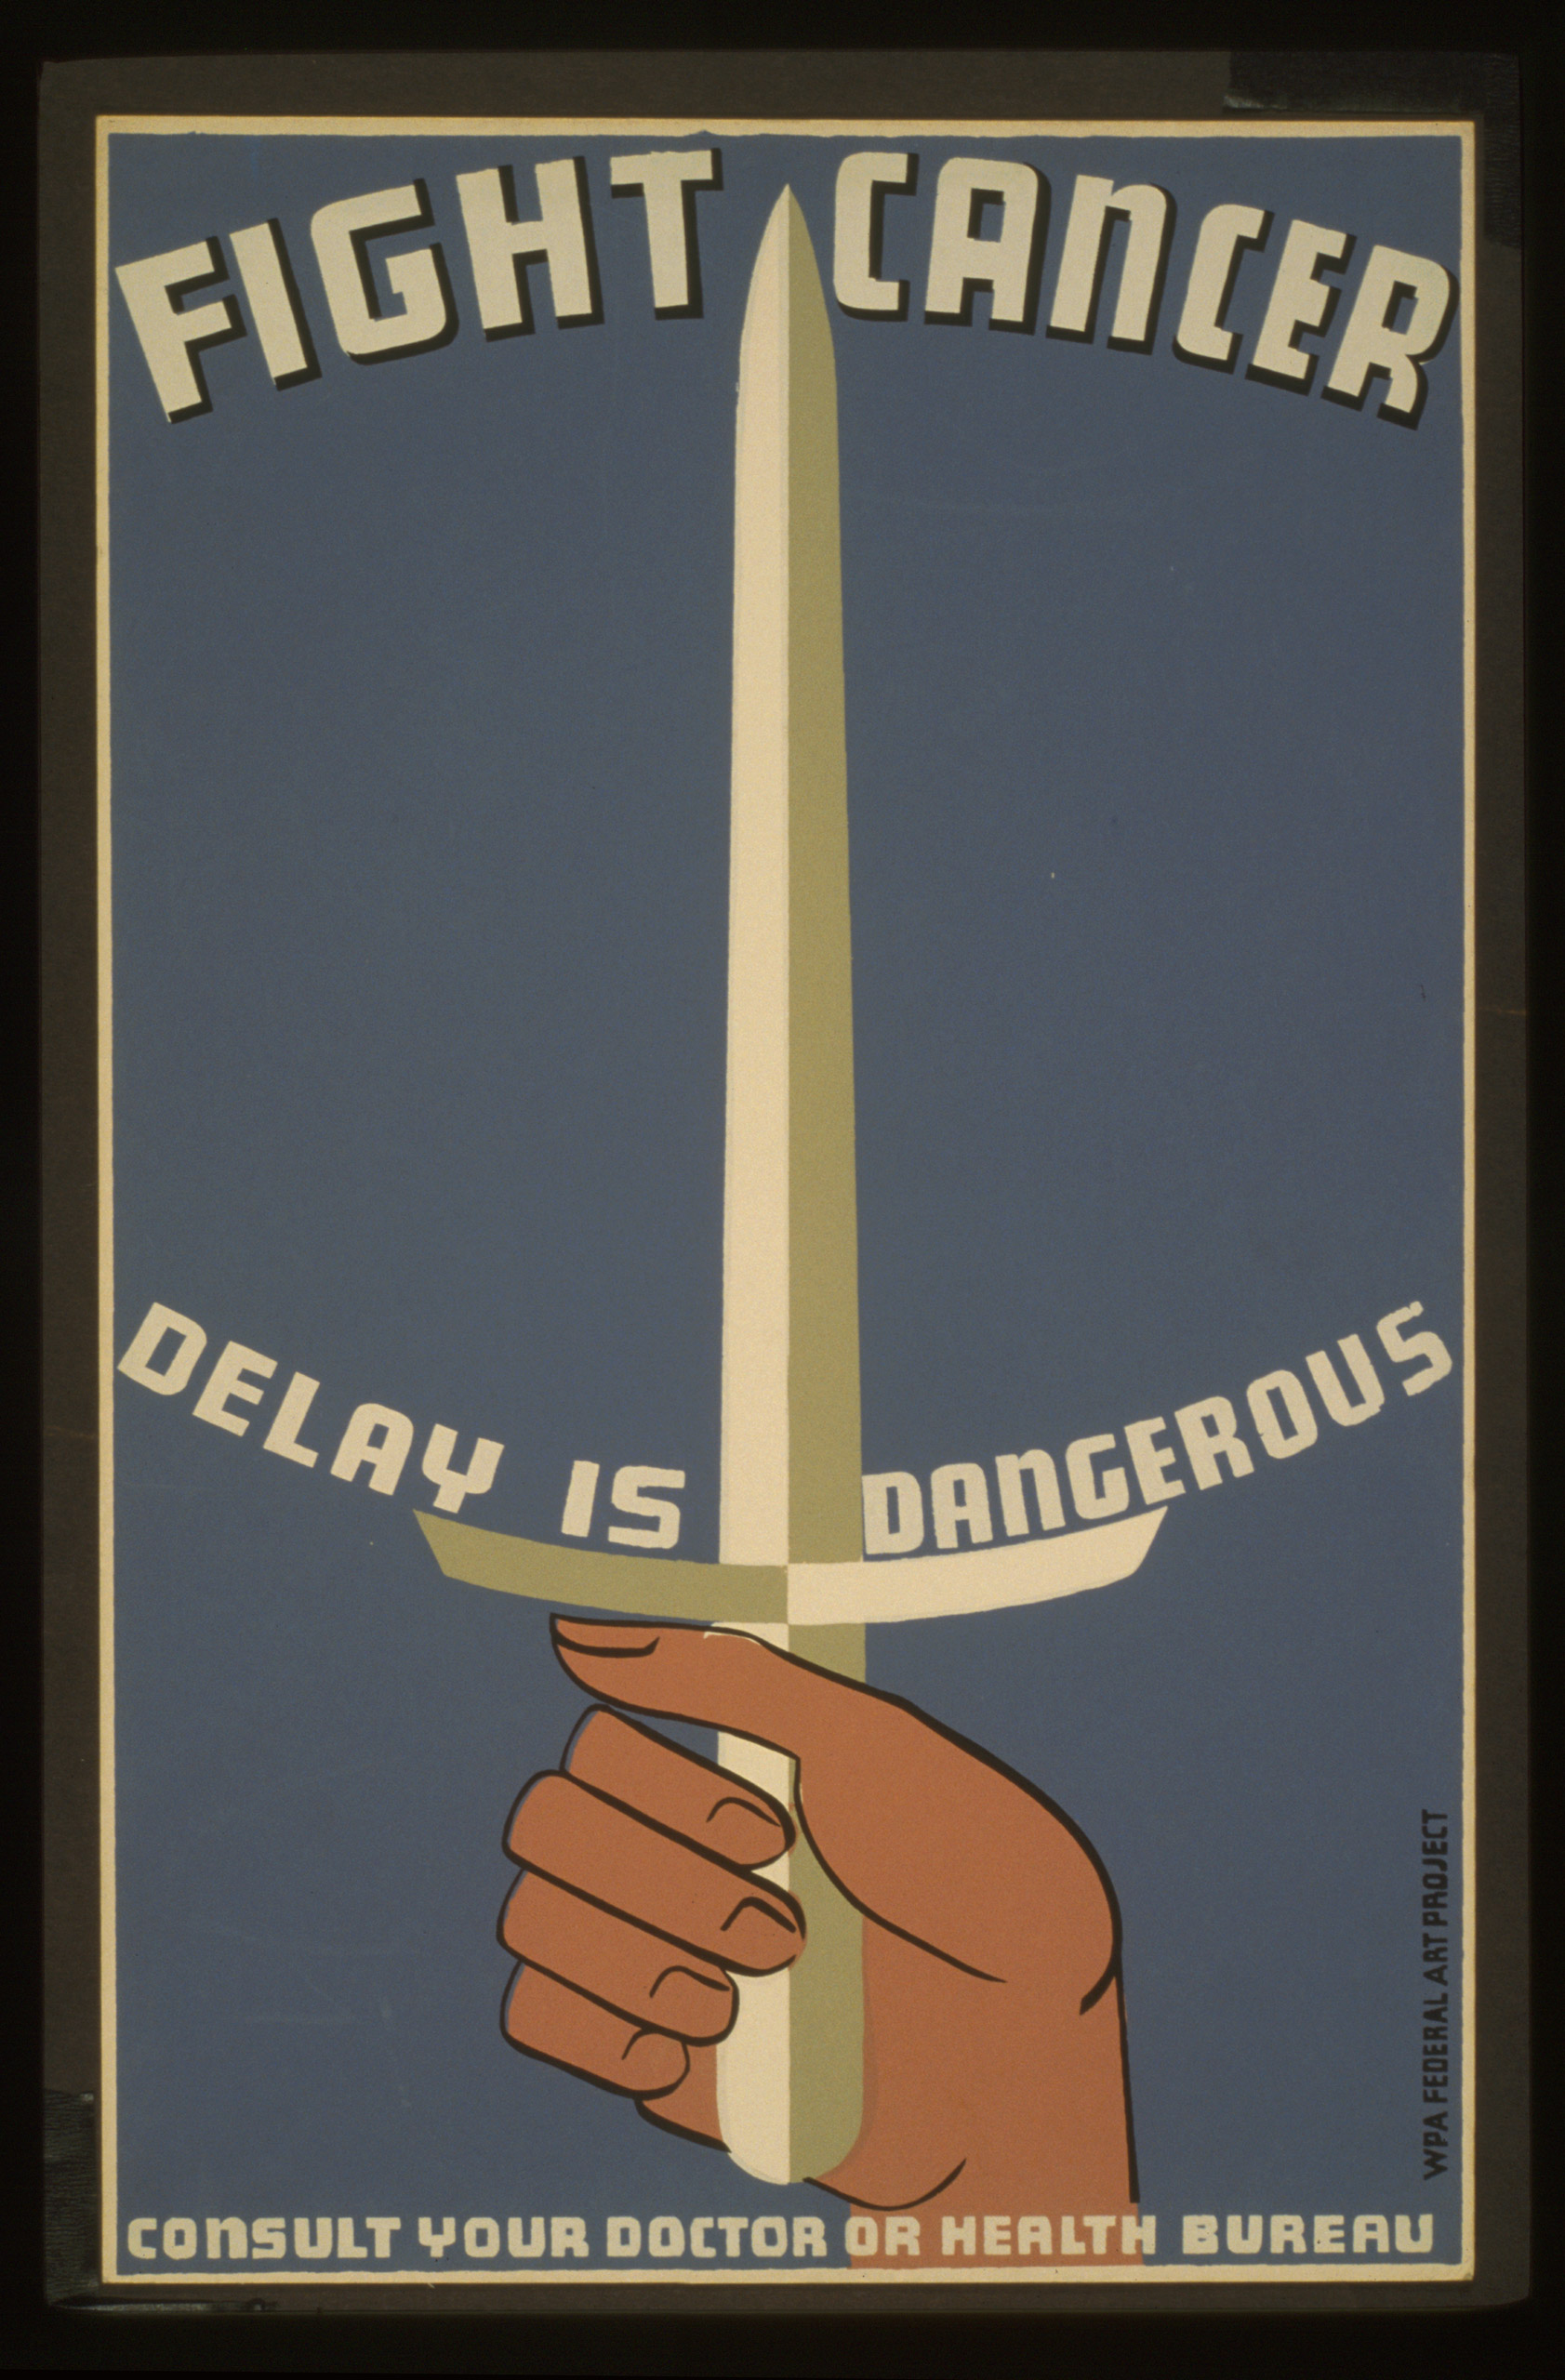 Poster promoting better health care through early treatment of cancer, showing a hand holding a sword. Created between 1936 and 1938.